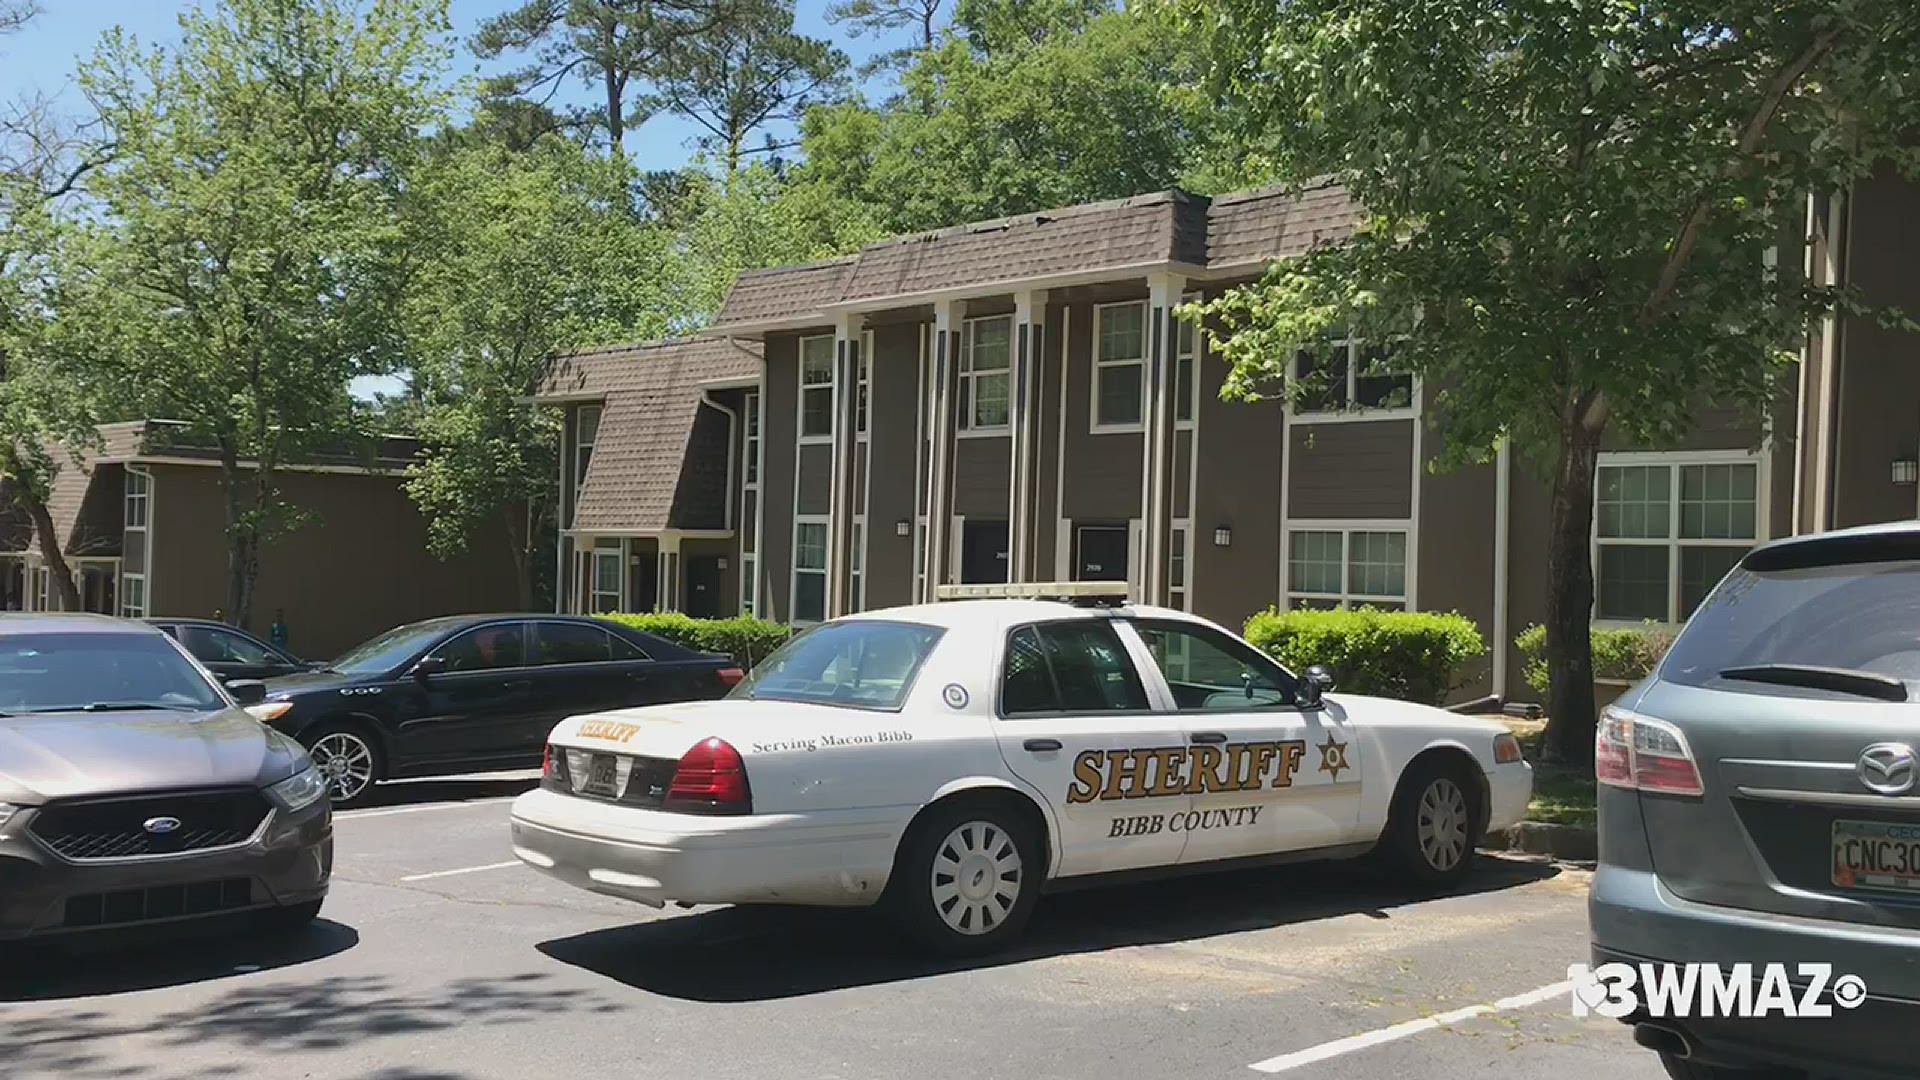 The Bibb County Sheriff's Office says a woman was found shot outside her apartment Sunday morning. She was taken to the hospital where she later died.